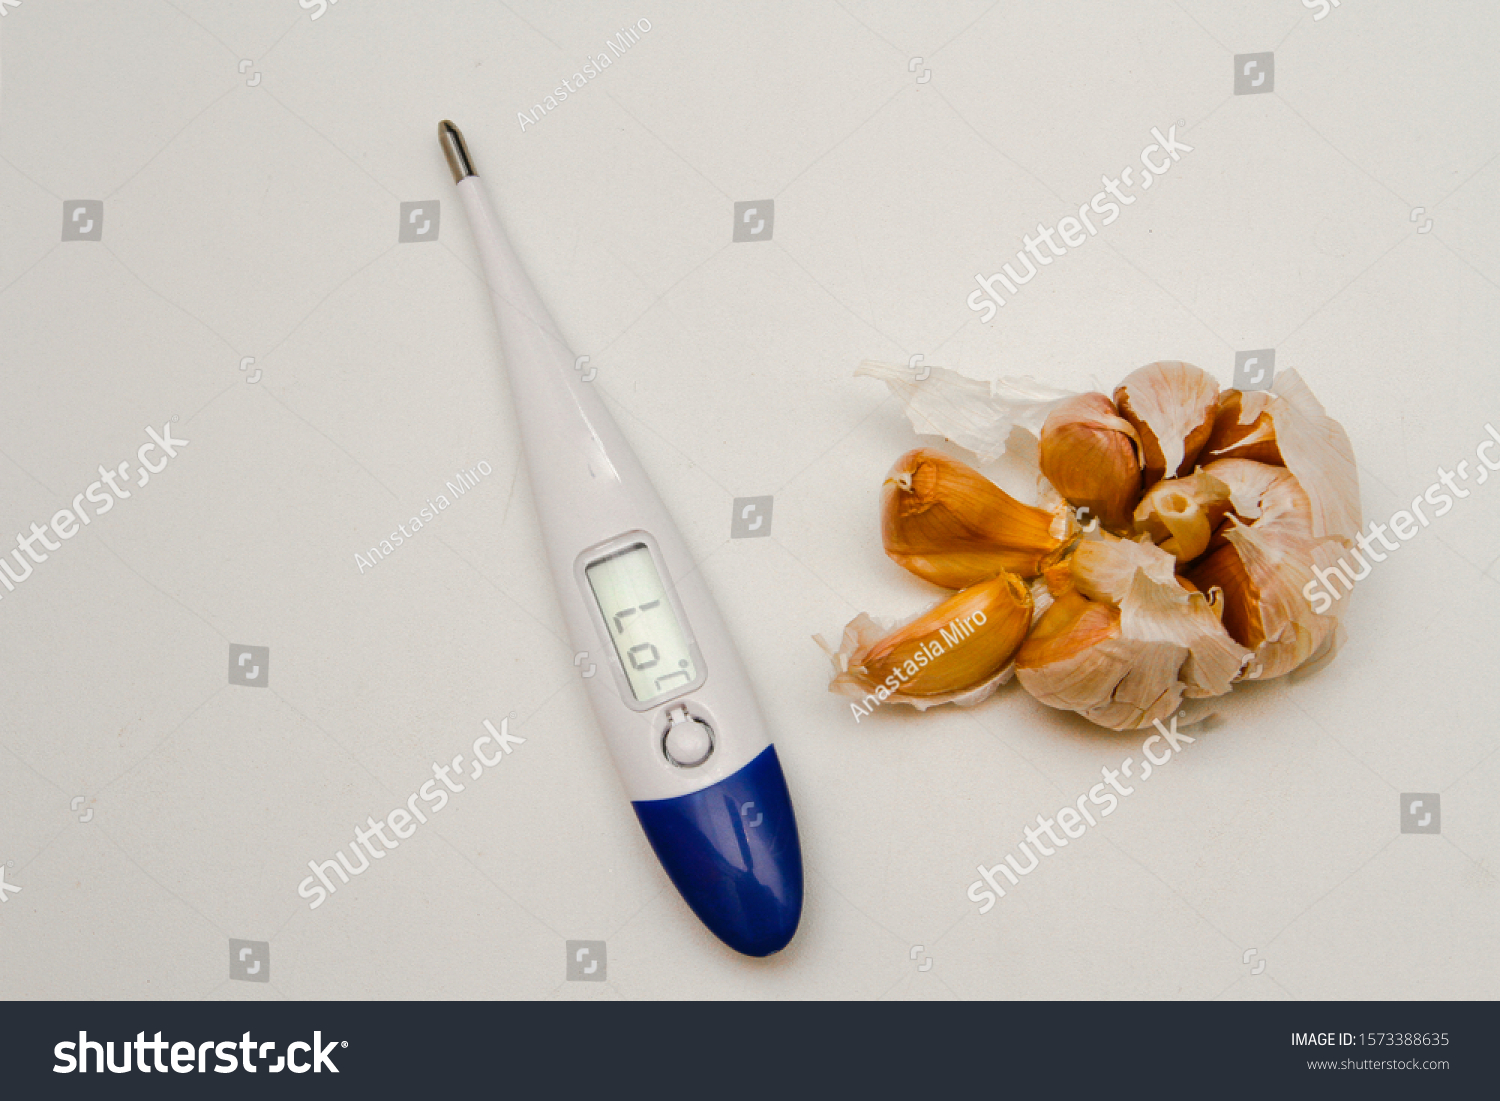 thermometer and garlic on a white background for the prevention of colds top view . Flu and cold season. Maintain health #1573388635